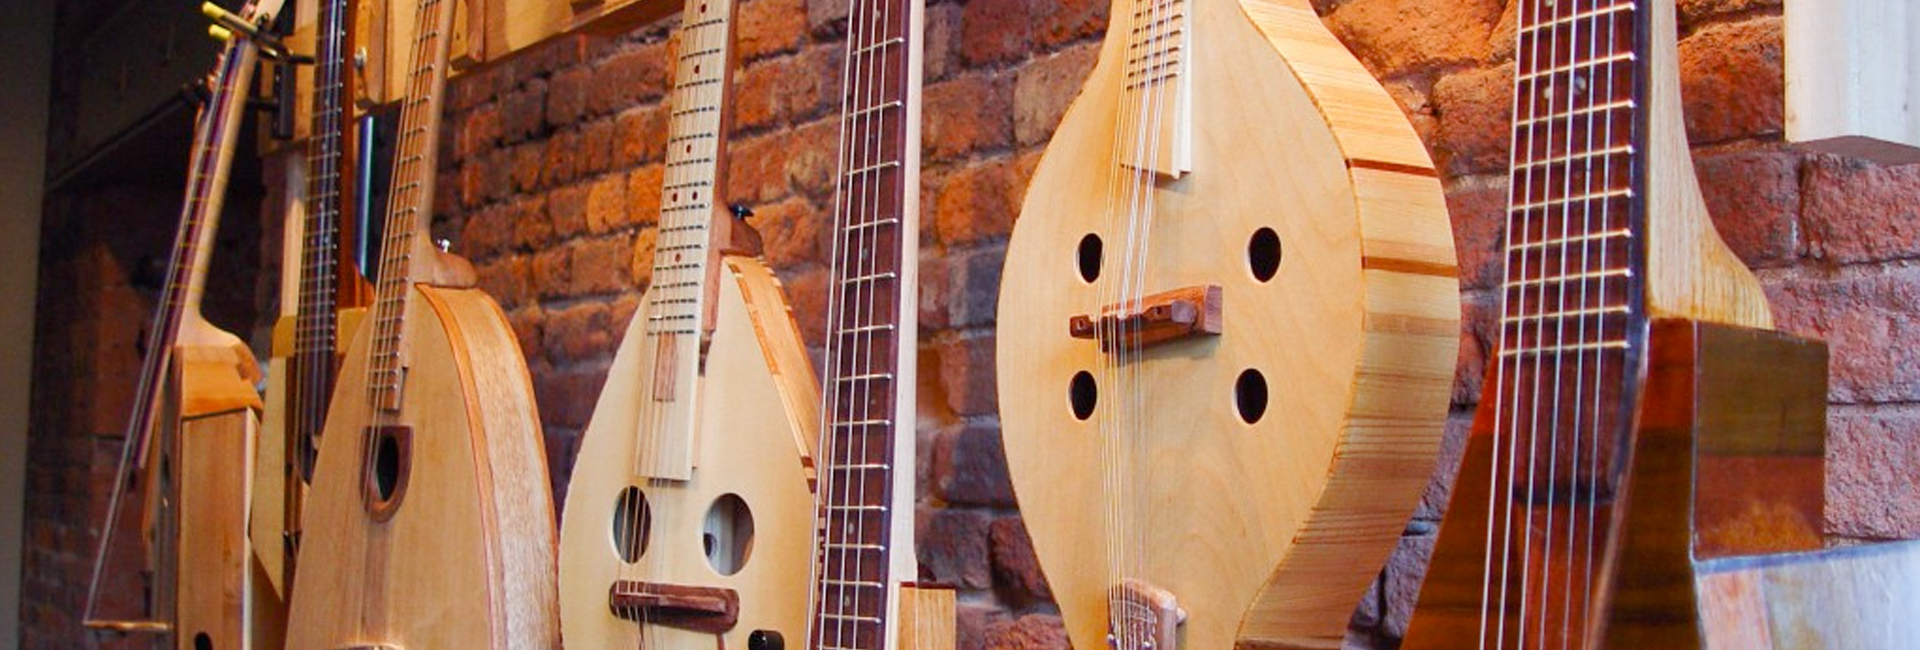 Instruments created by Ric Marchio (image courtesy marchiomusic.com)